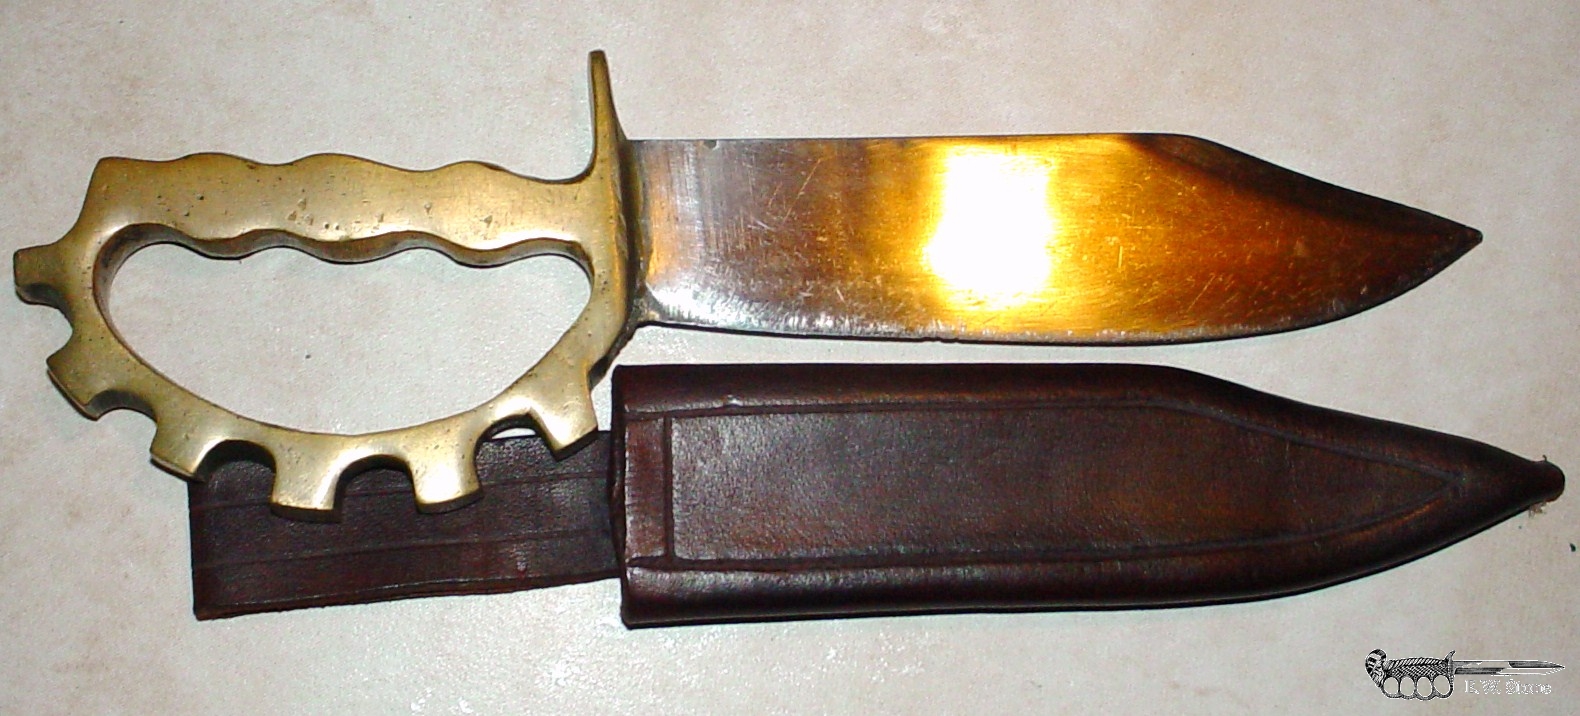 Aussie Small Cog Guard Ranger Knuckle Knife known as the Officer Model